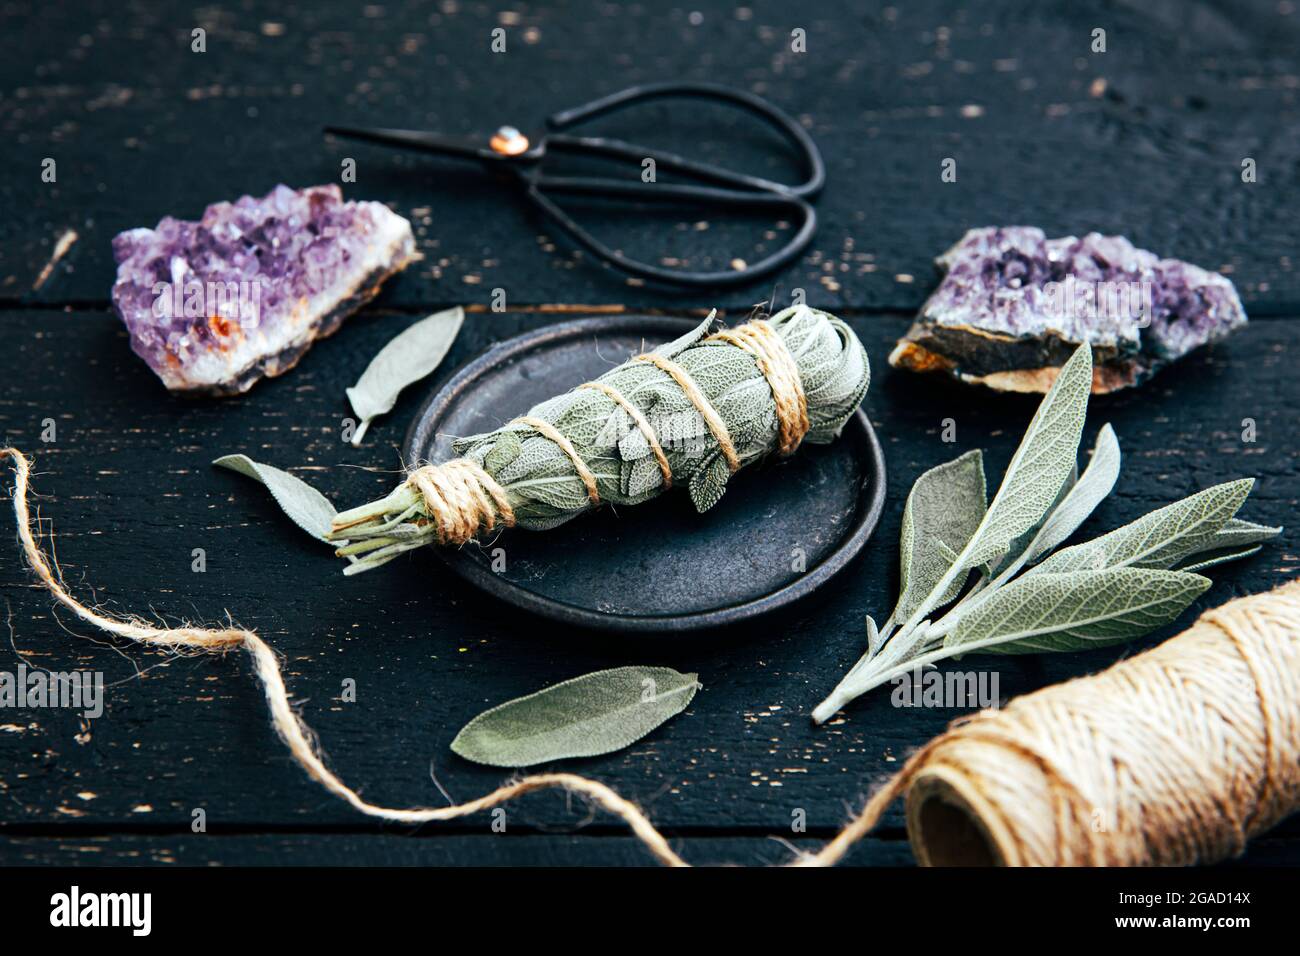 White homemade sage Salvia apiana smudge stick at home with homegrown sage leaves. Cotton string, vintage scissors and amethyst clusters. Stock Photo